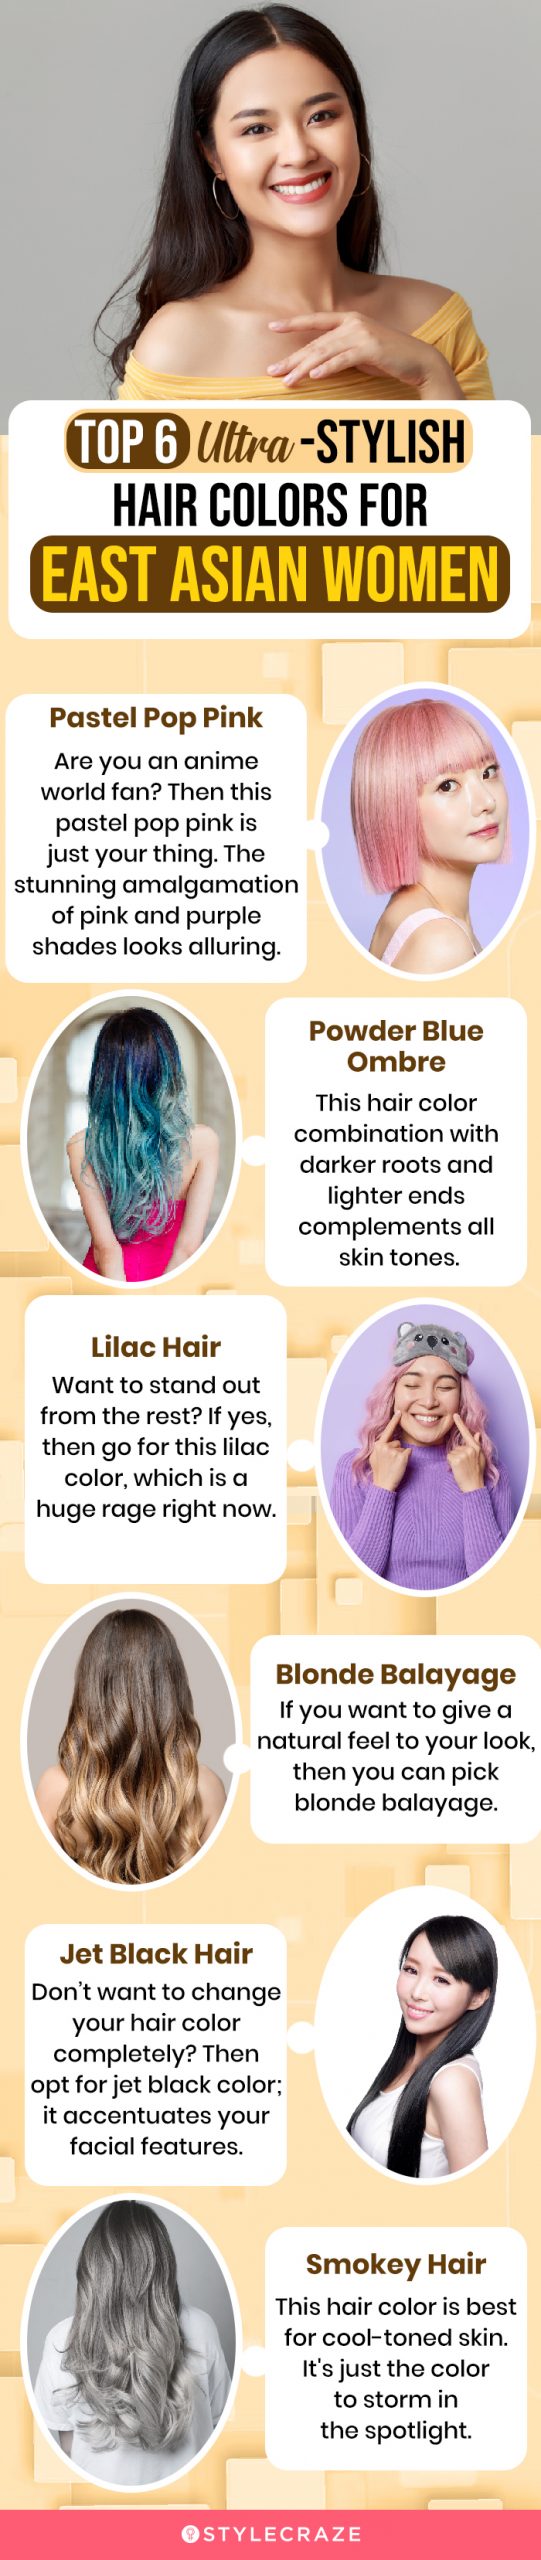 27 Stunning Hair Colors For East Asian Ladies